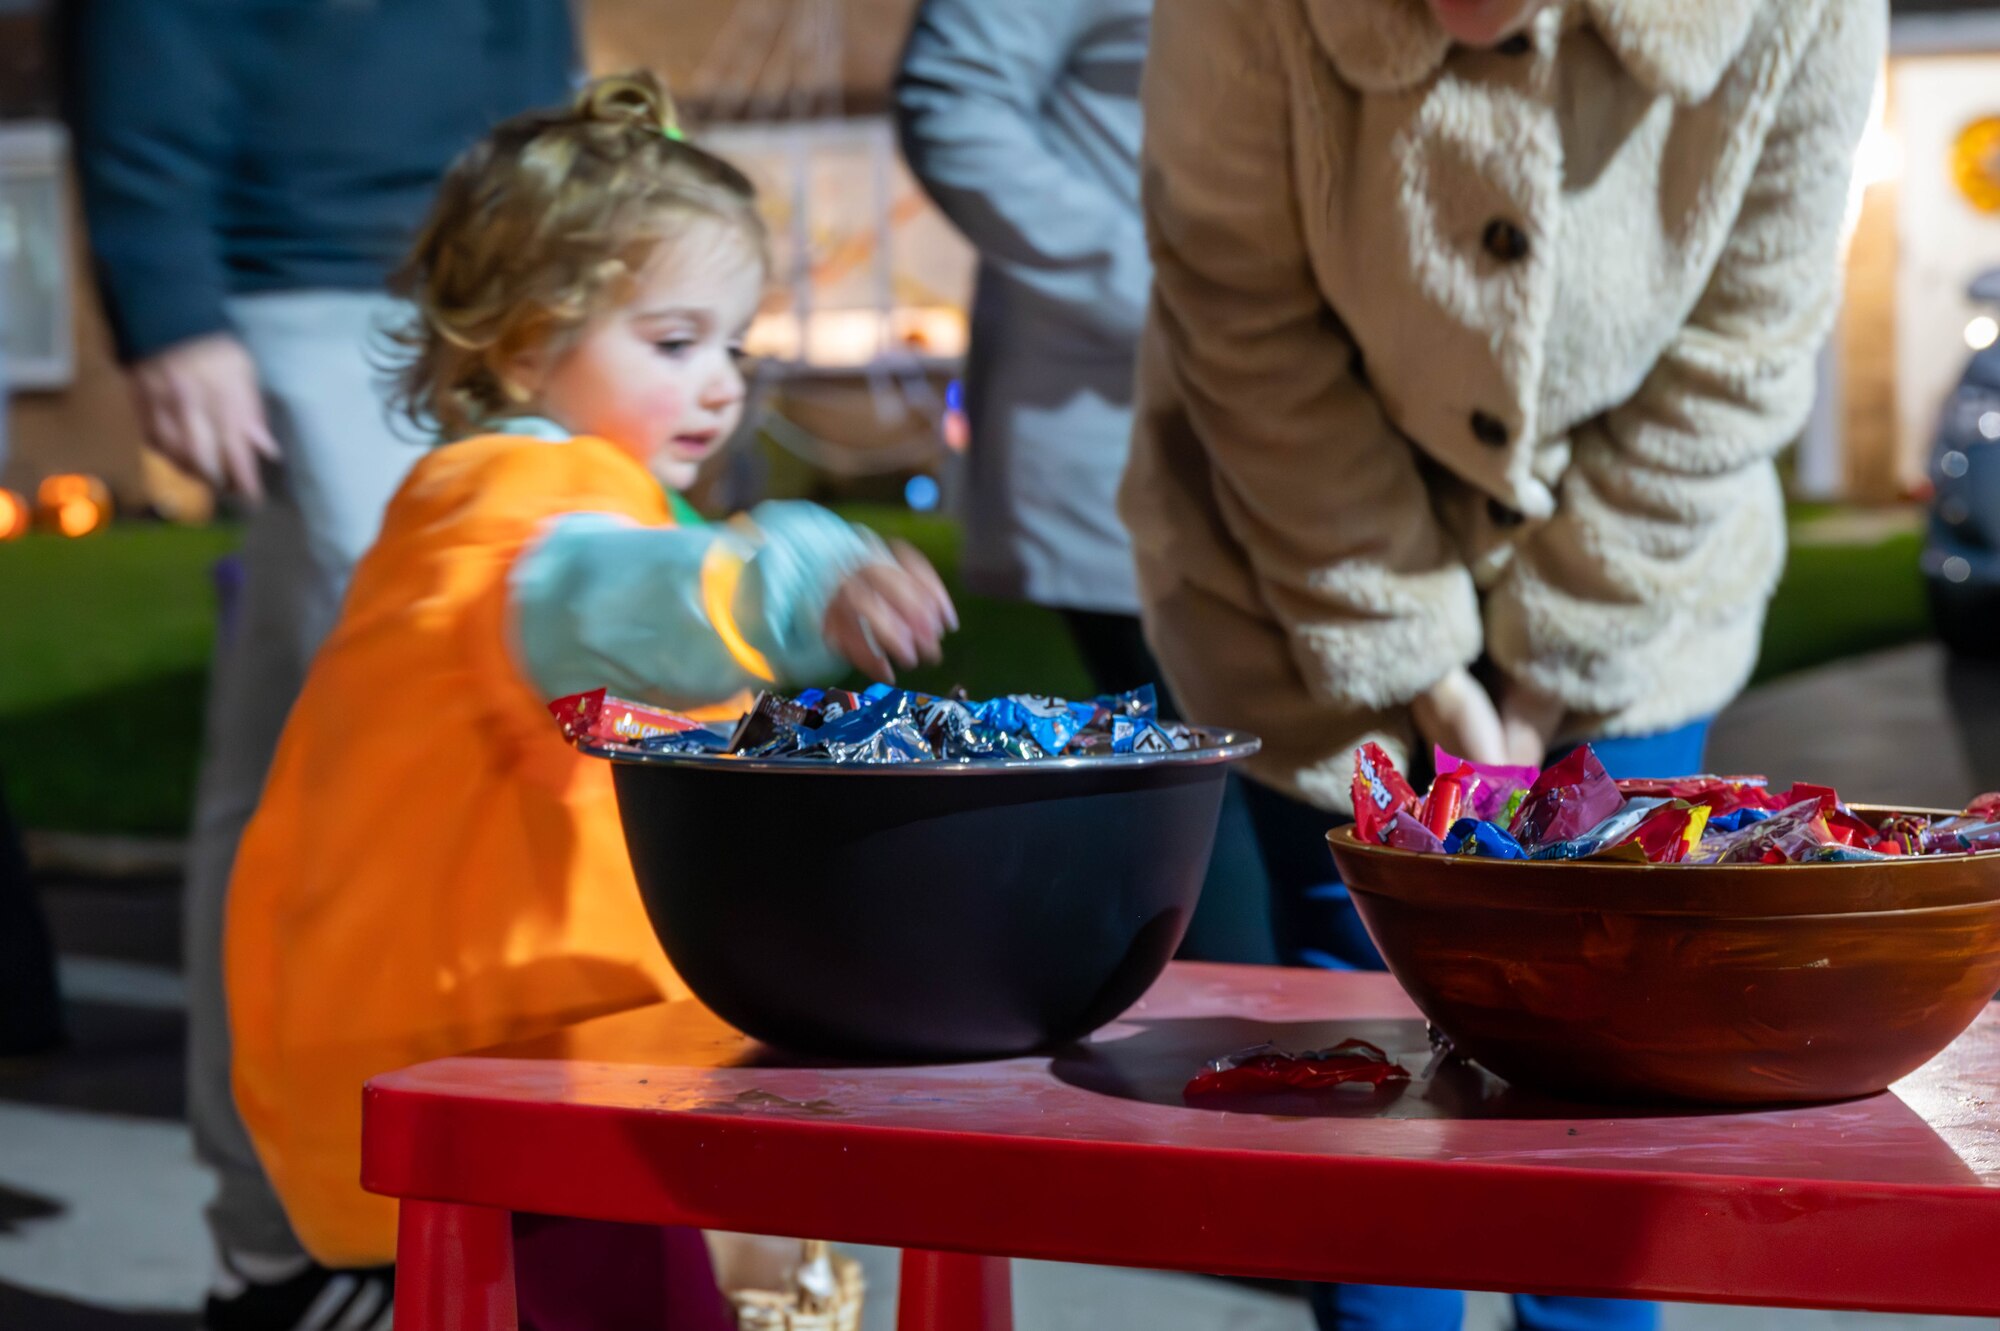 A small child dressed as a pumpkin picks up a piece of candy from a bowl